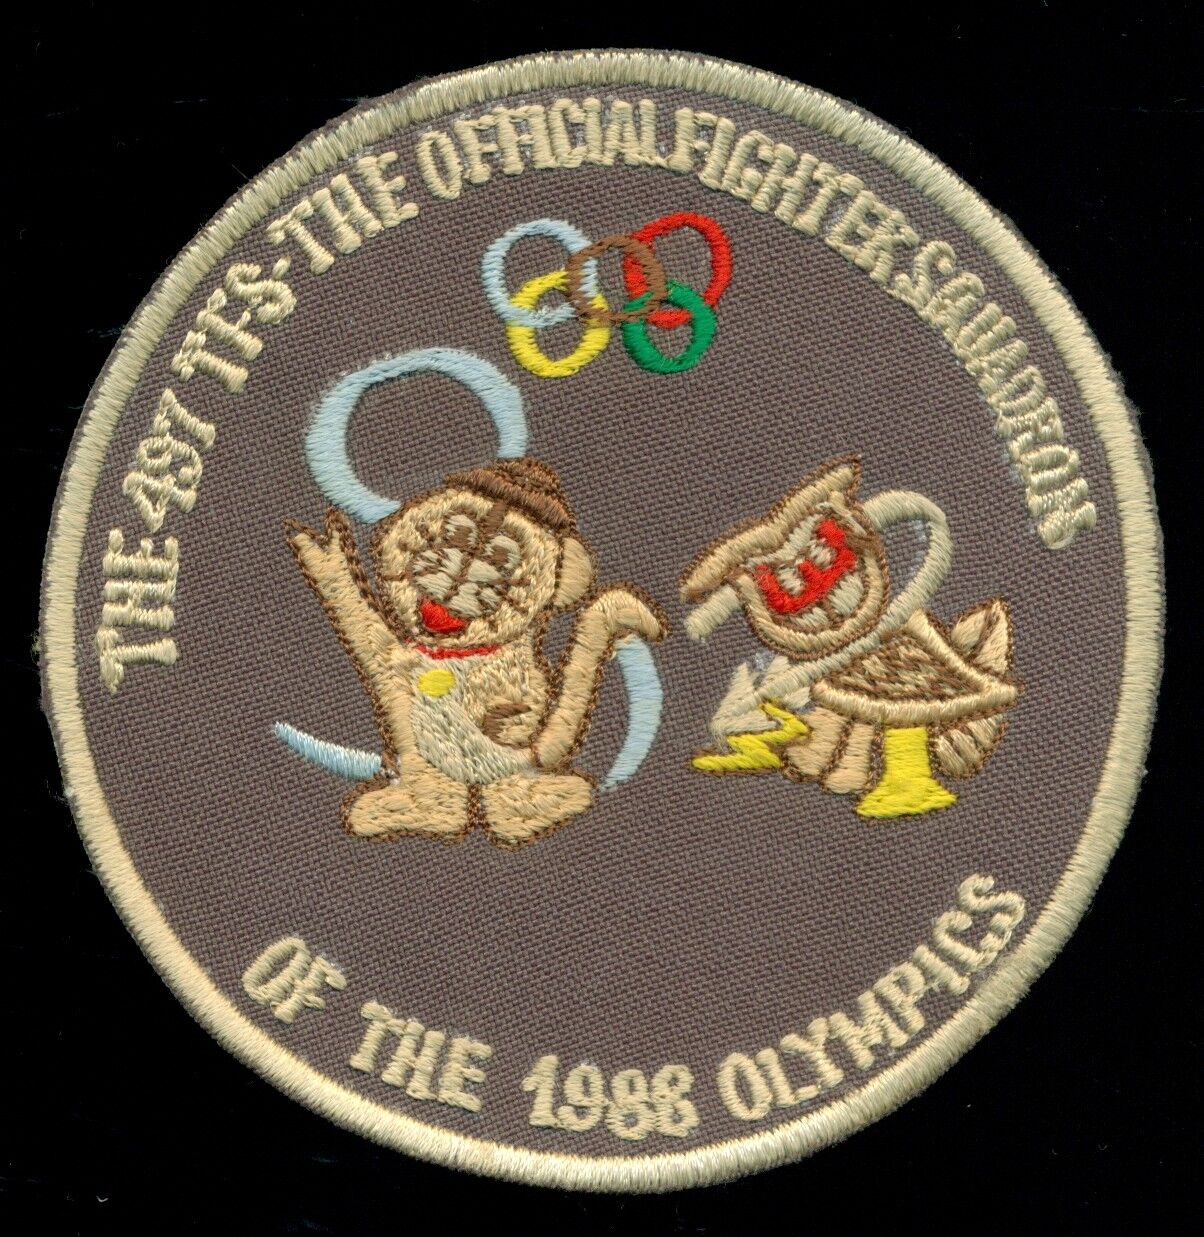 USAF 497th Tactical Fighter Squadron Olympics 1988 Patch J-1